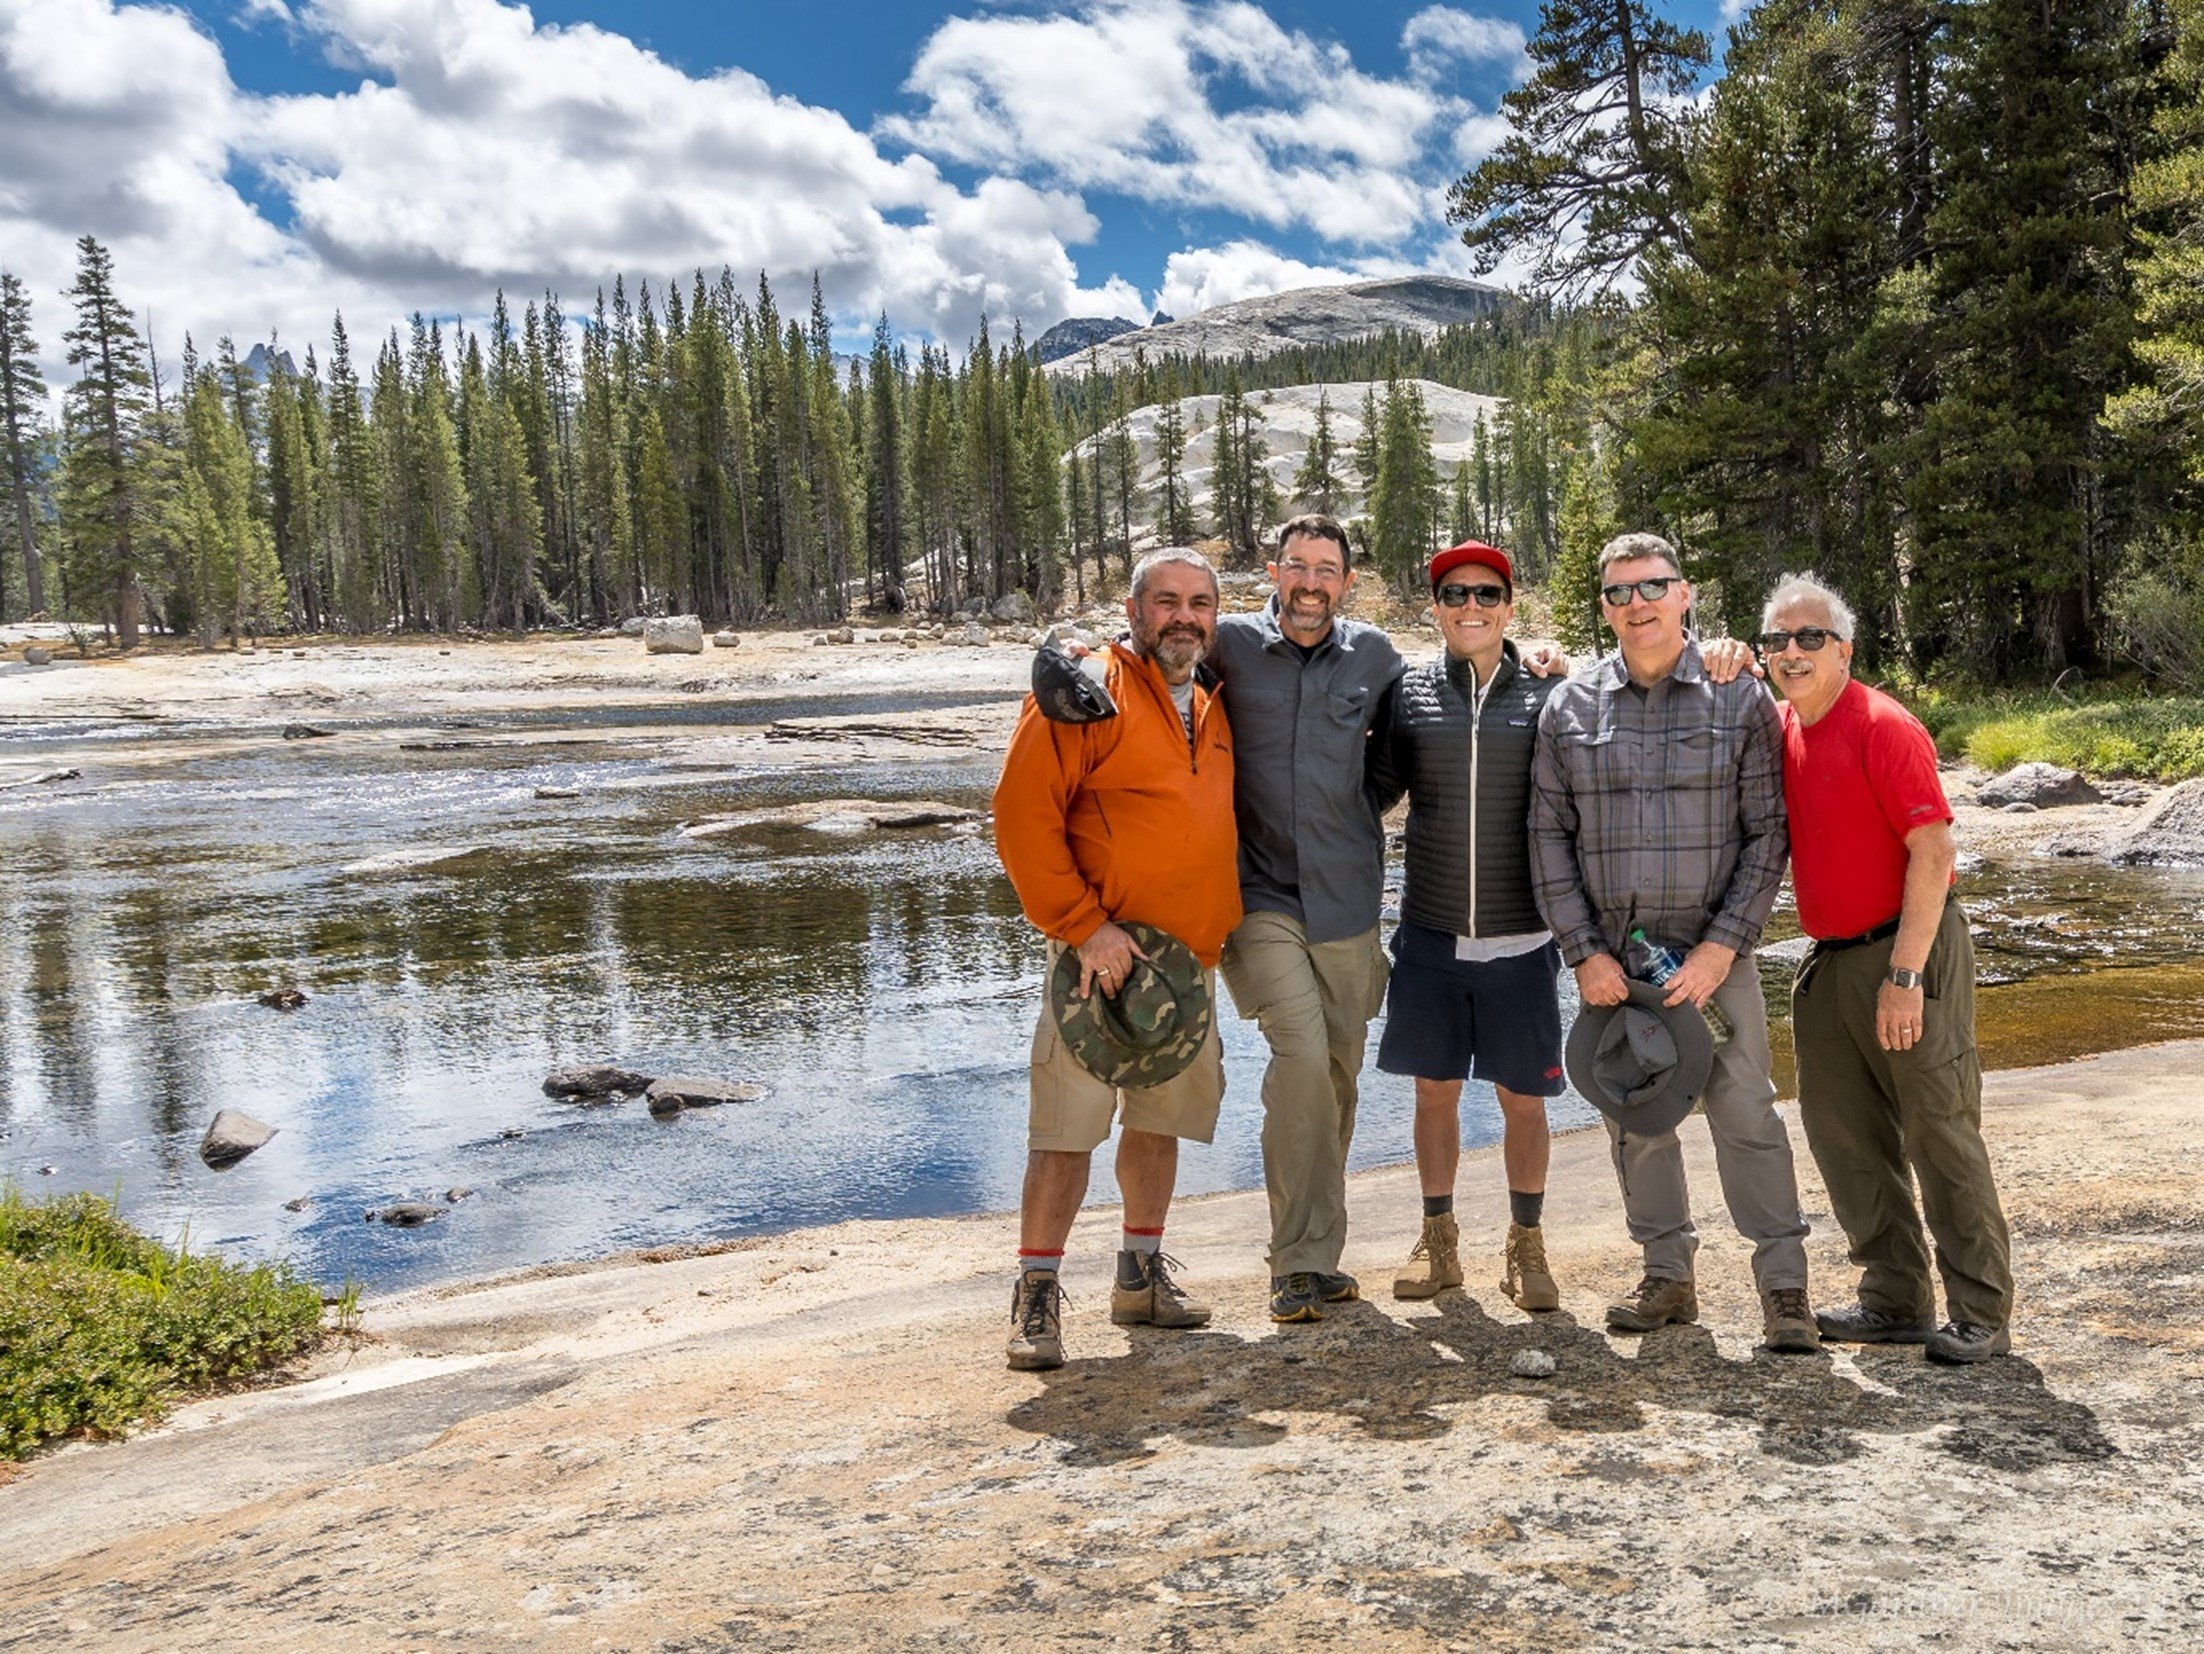 APTech employees enjoying time off together hiking in Yosemite National Park